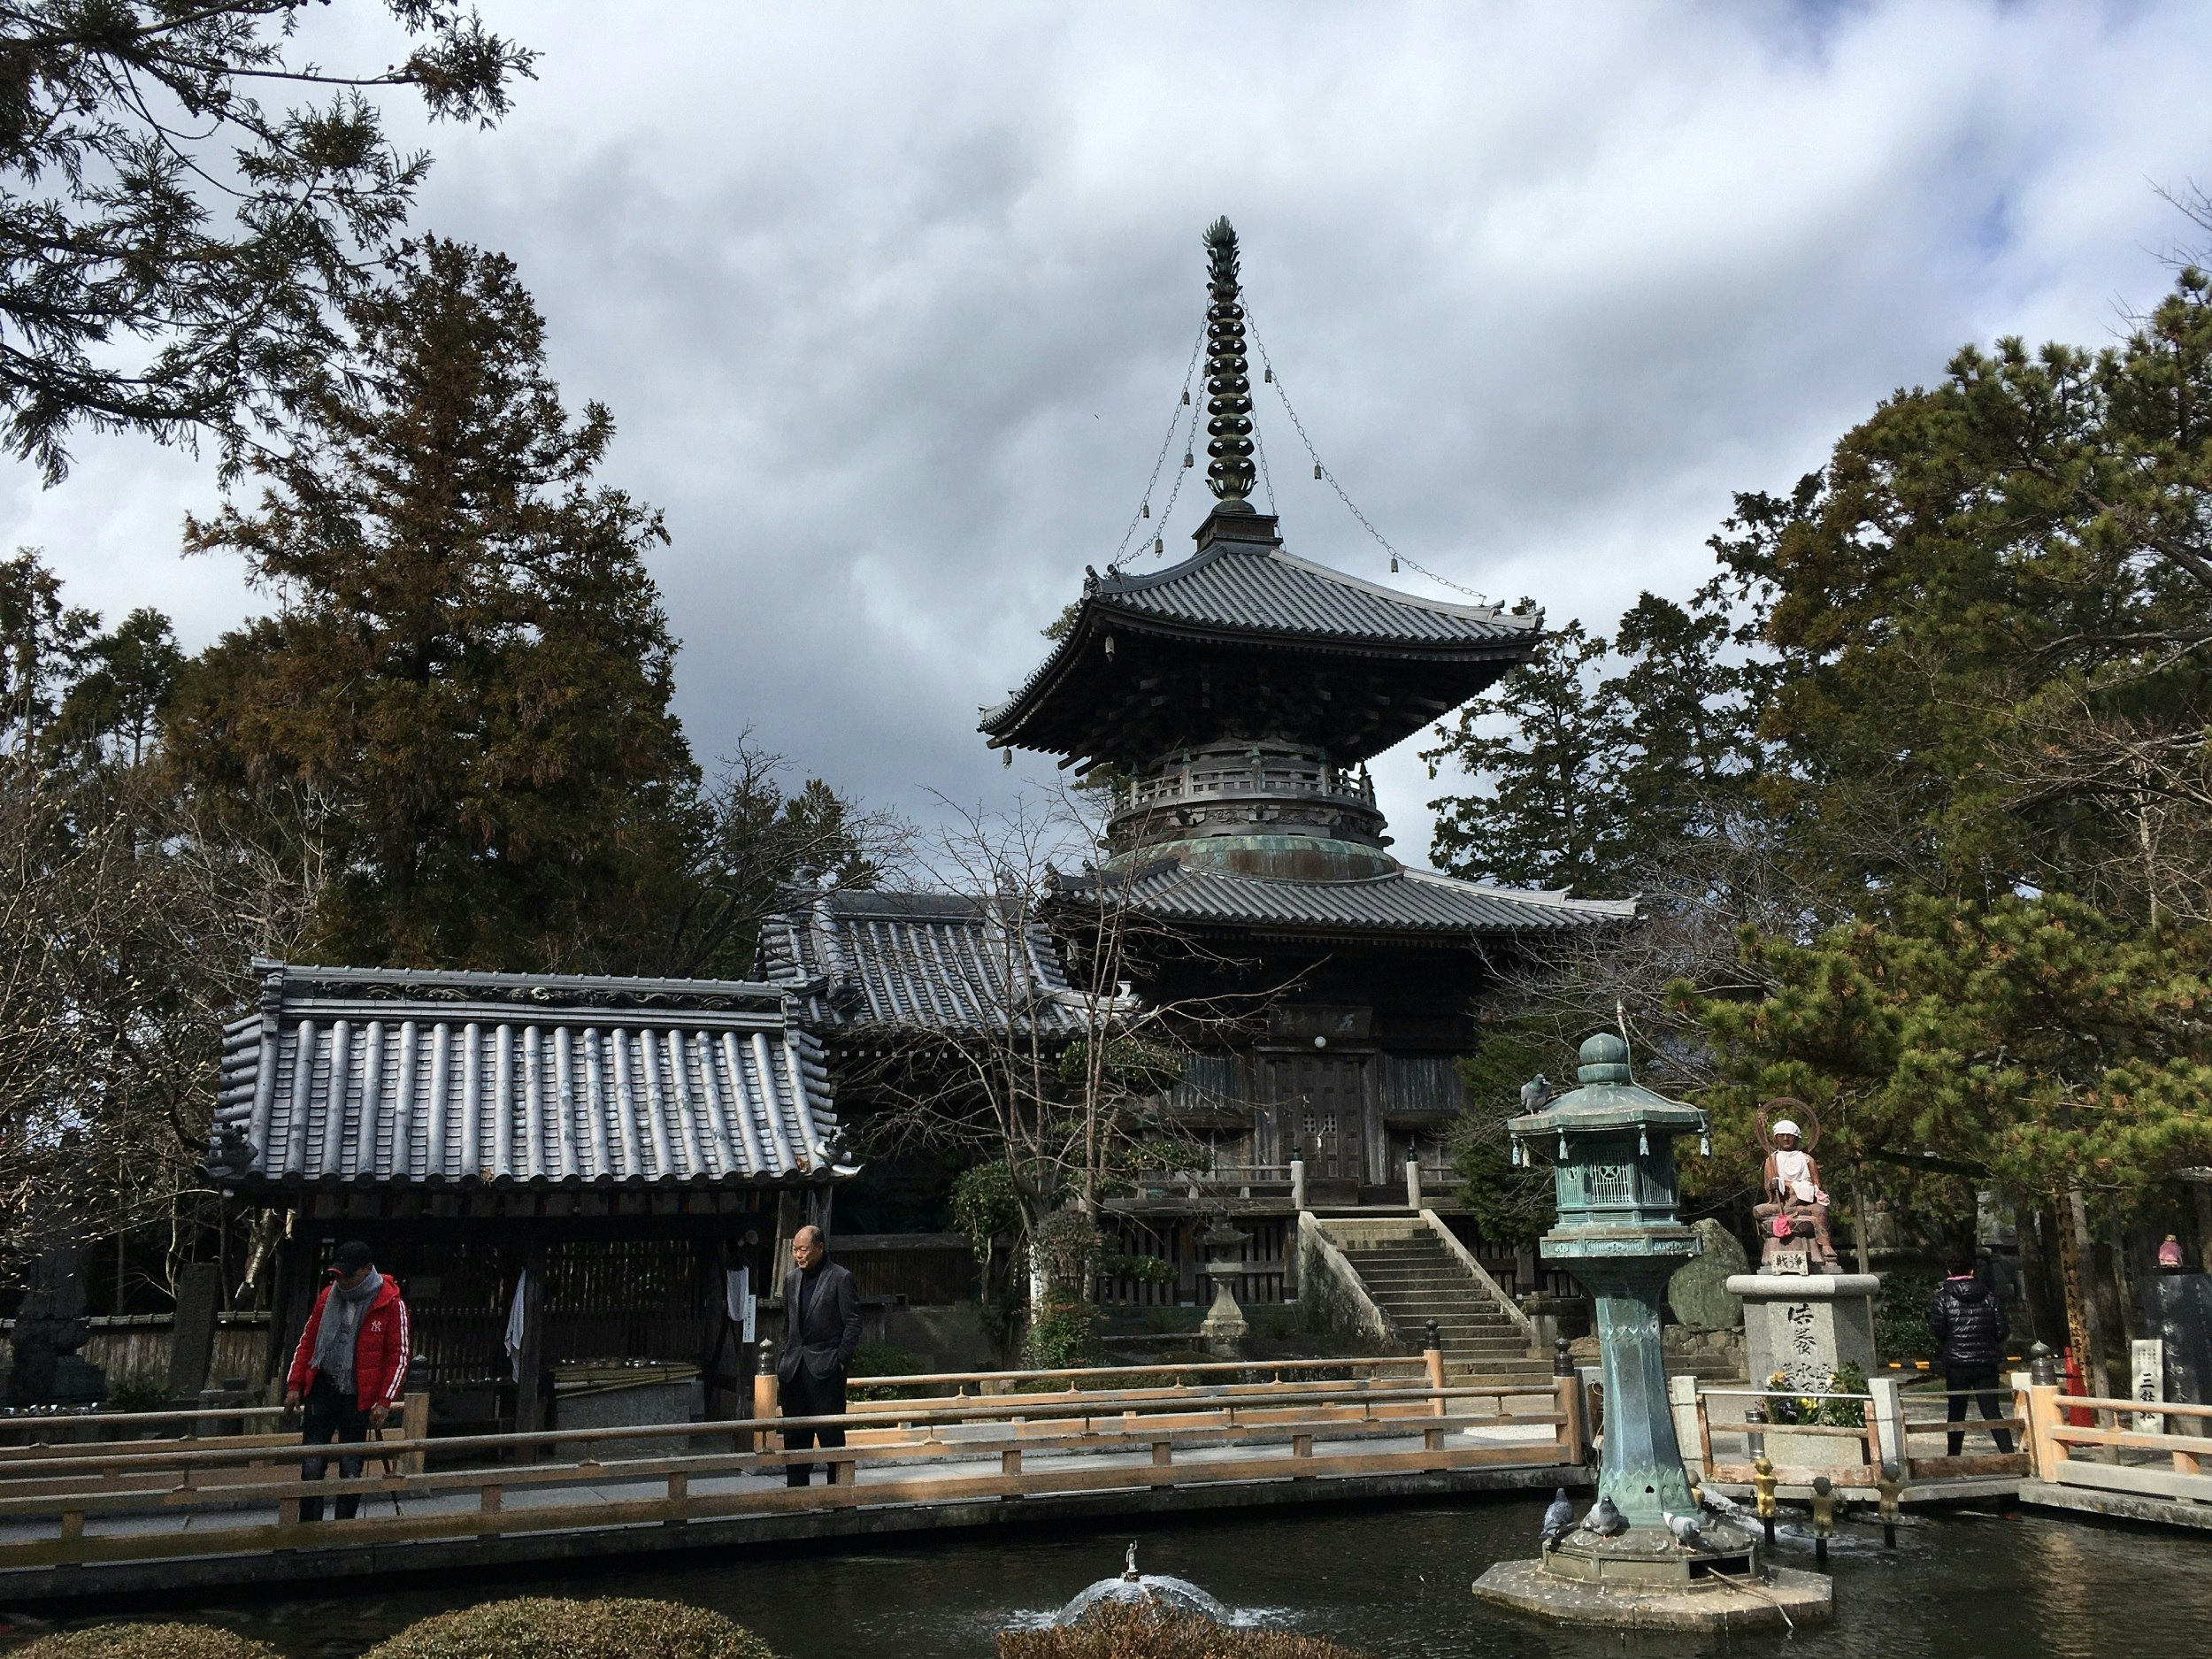 A pagoda building with slate-grey roofs. Two people stand in the foreground looking in a pond.